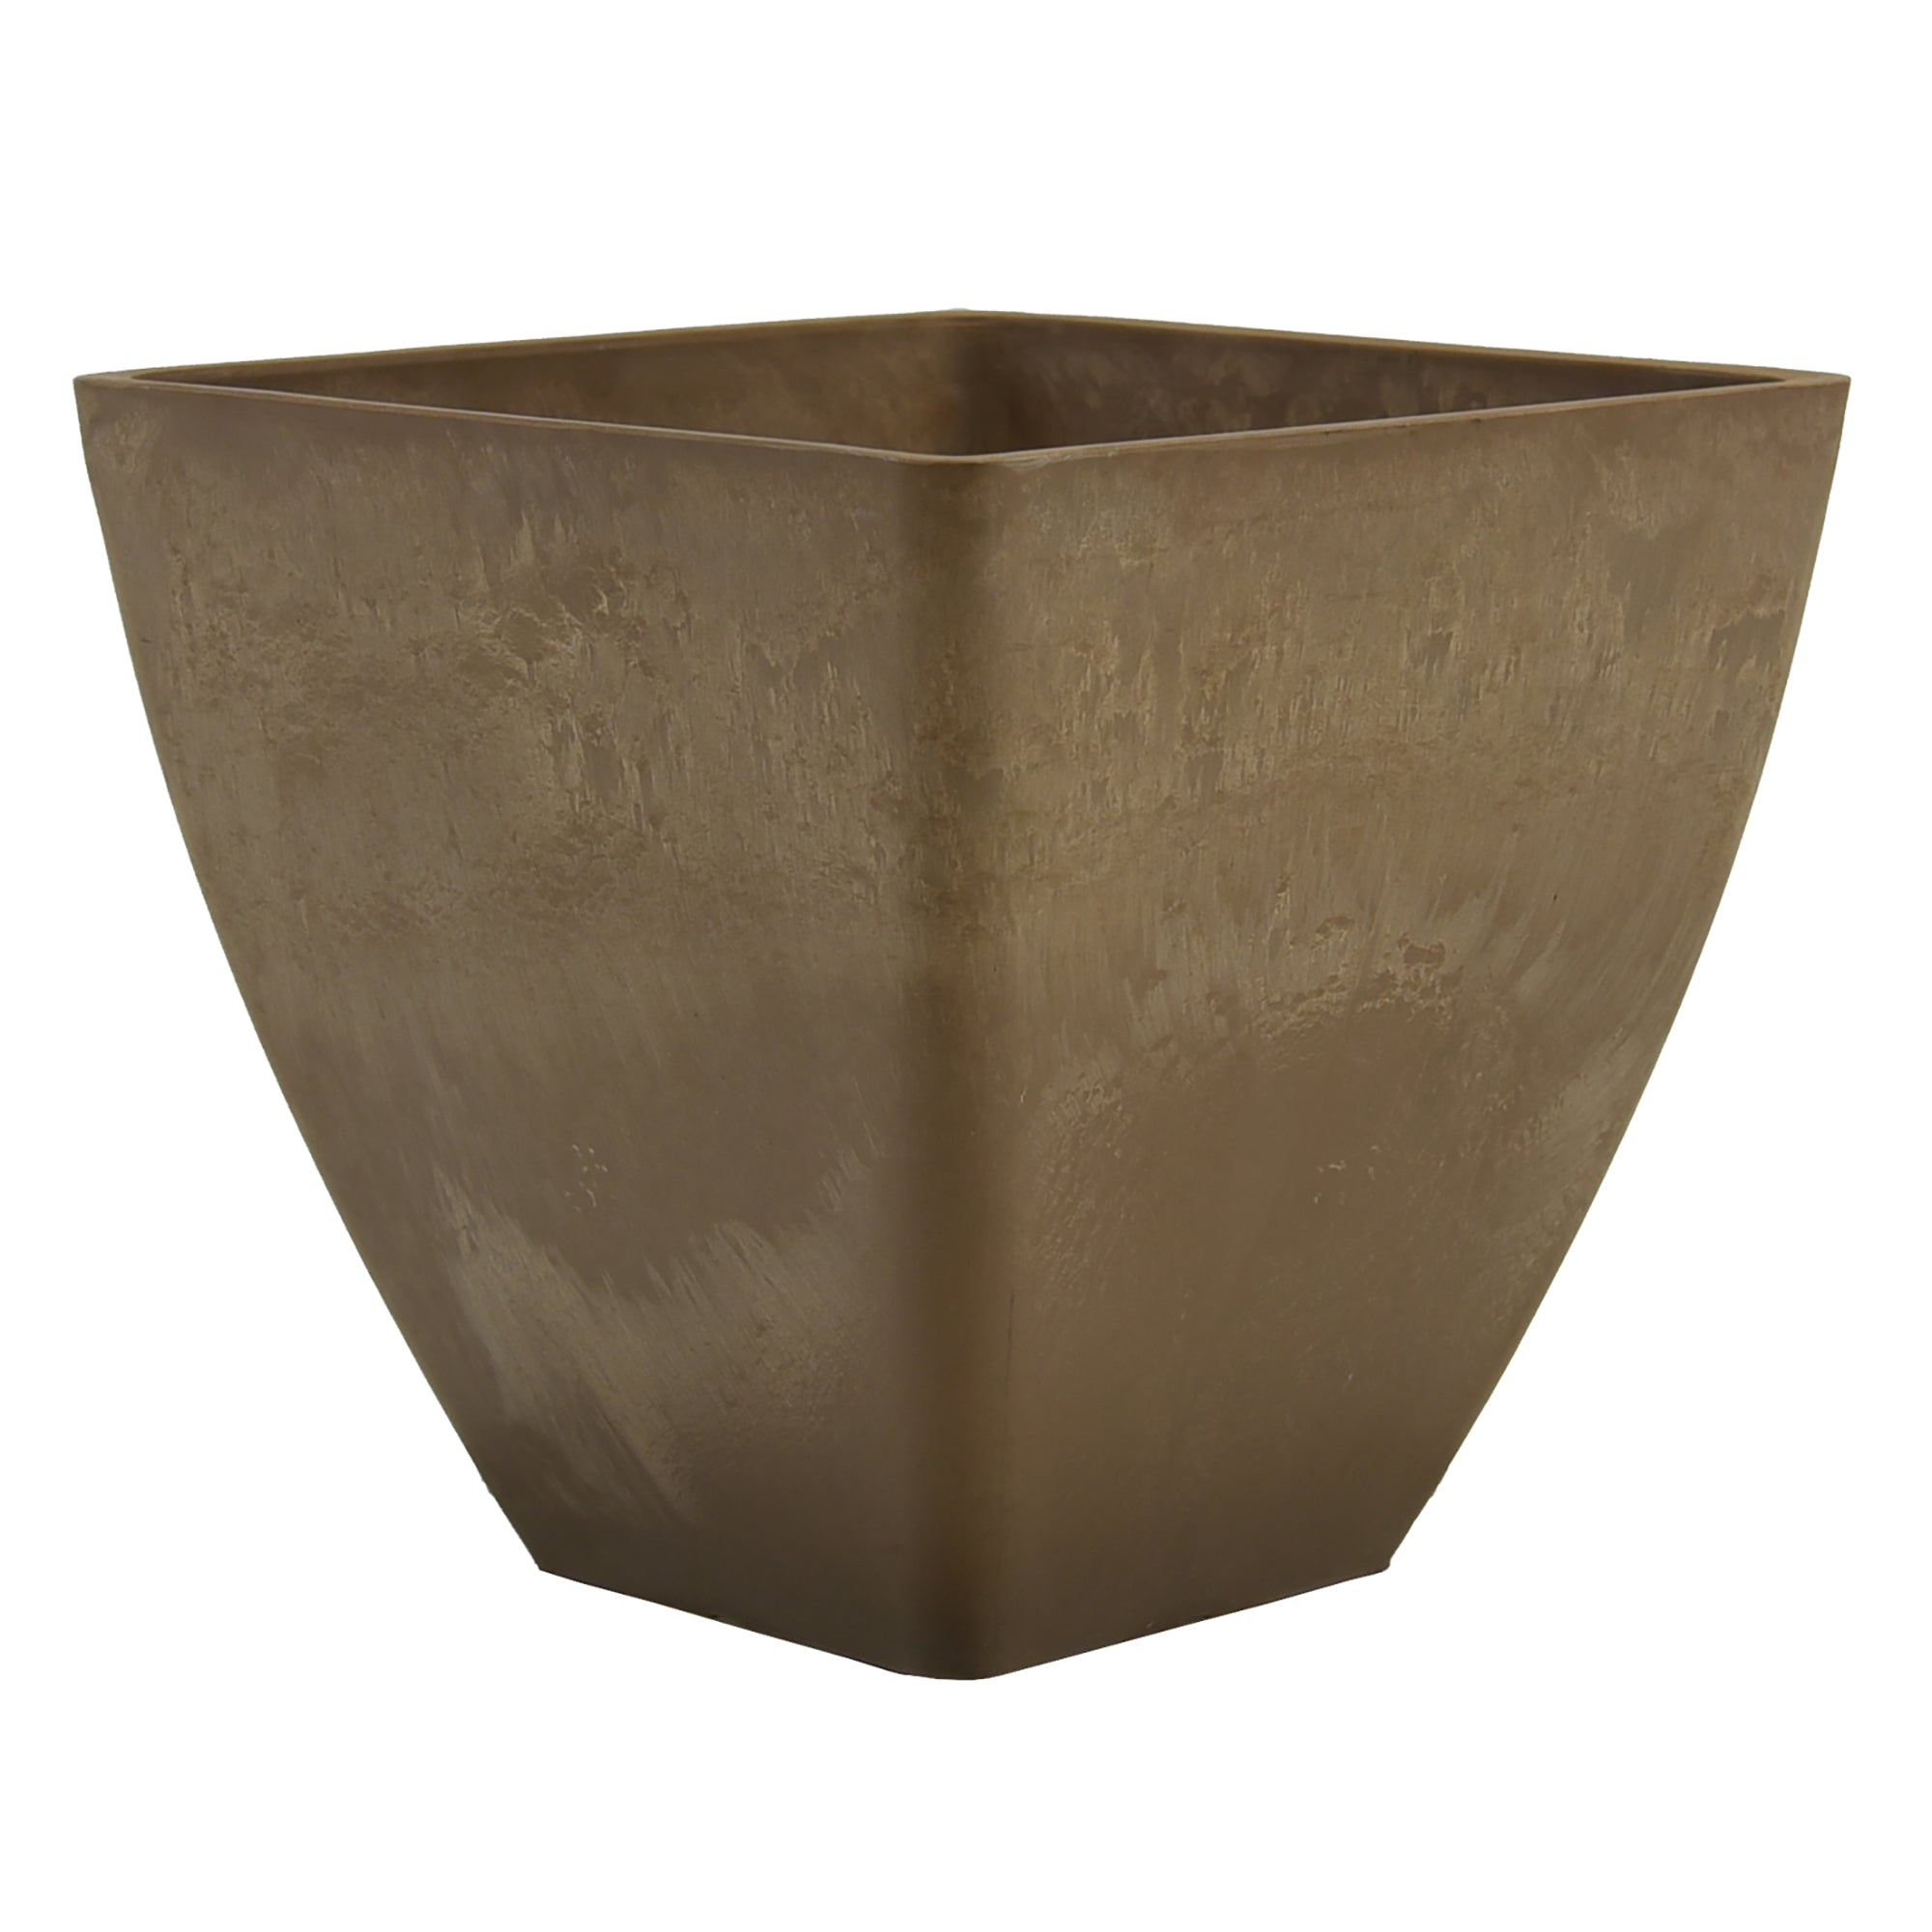 12 inch square planter in oak on a white background